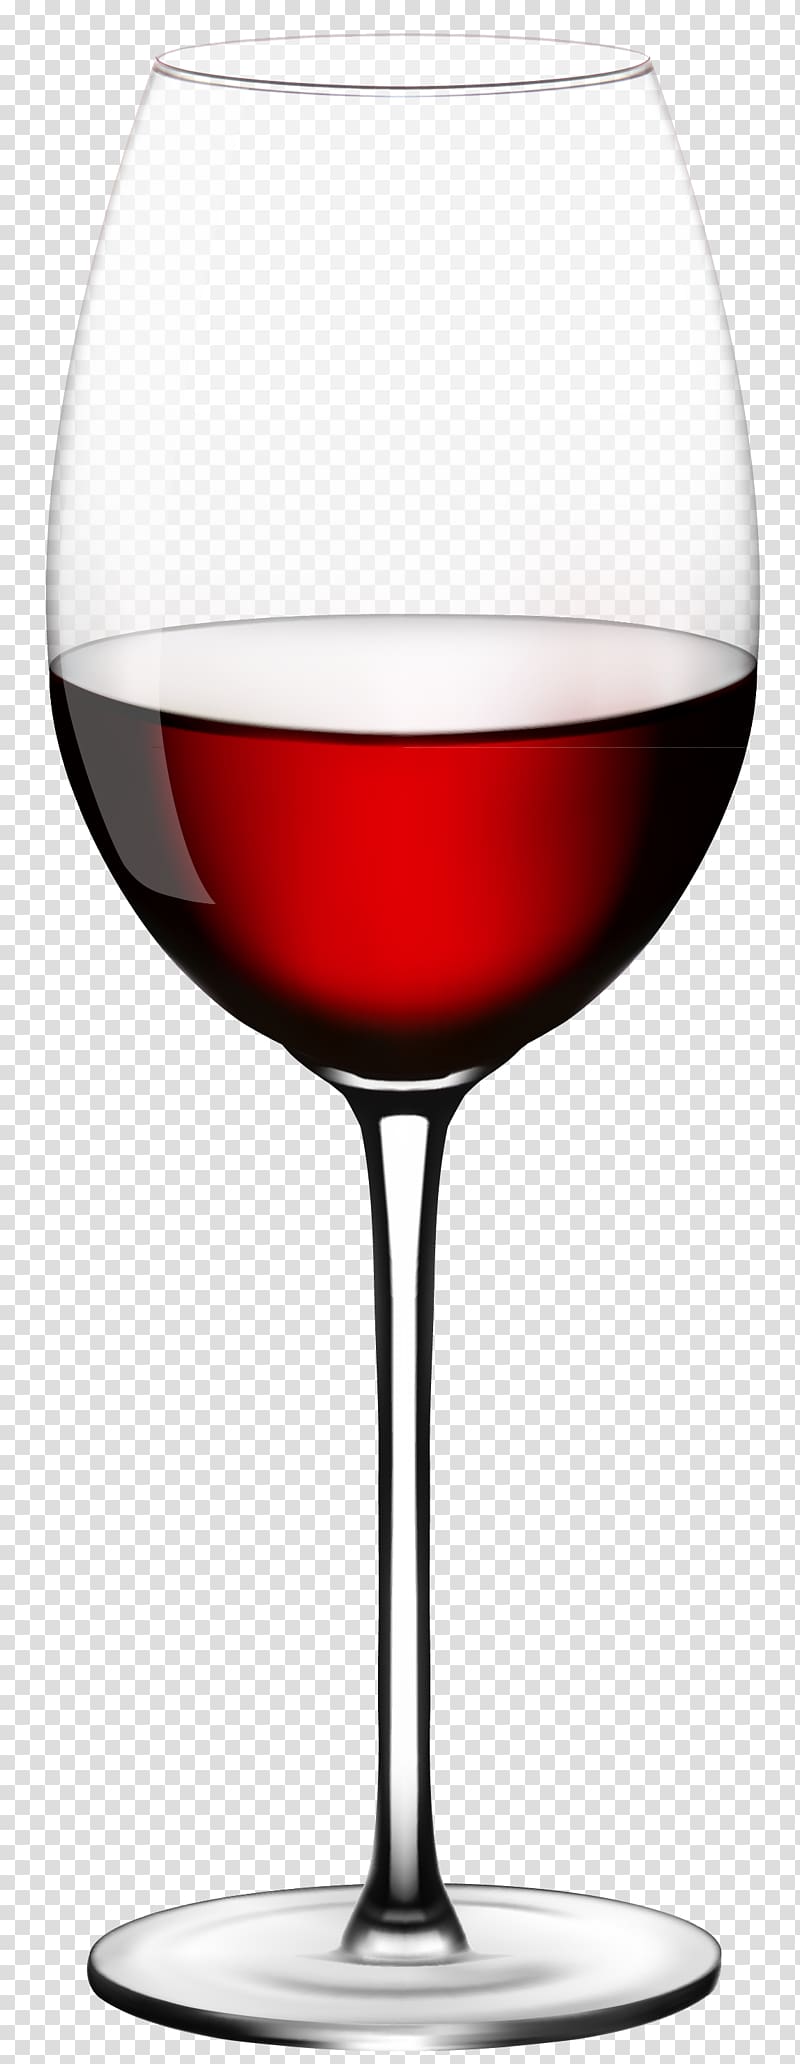 wine glass illustration, Red Wine Champagne Wine glass, Wine Glass transparent background PNG clipart